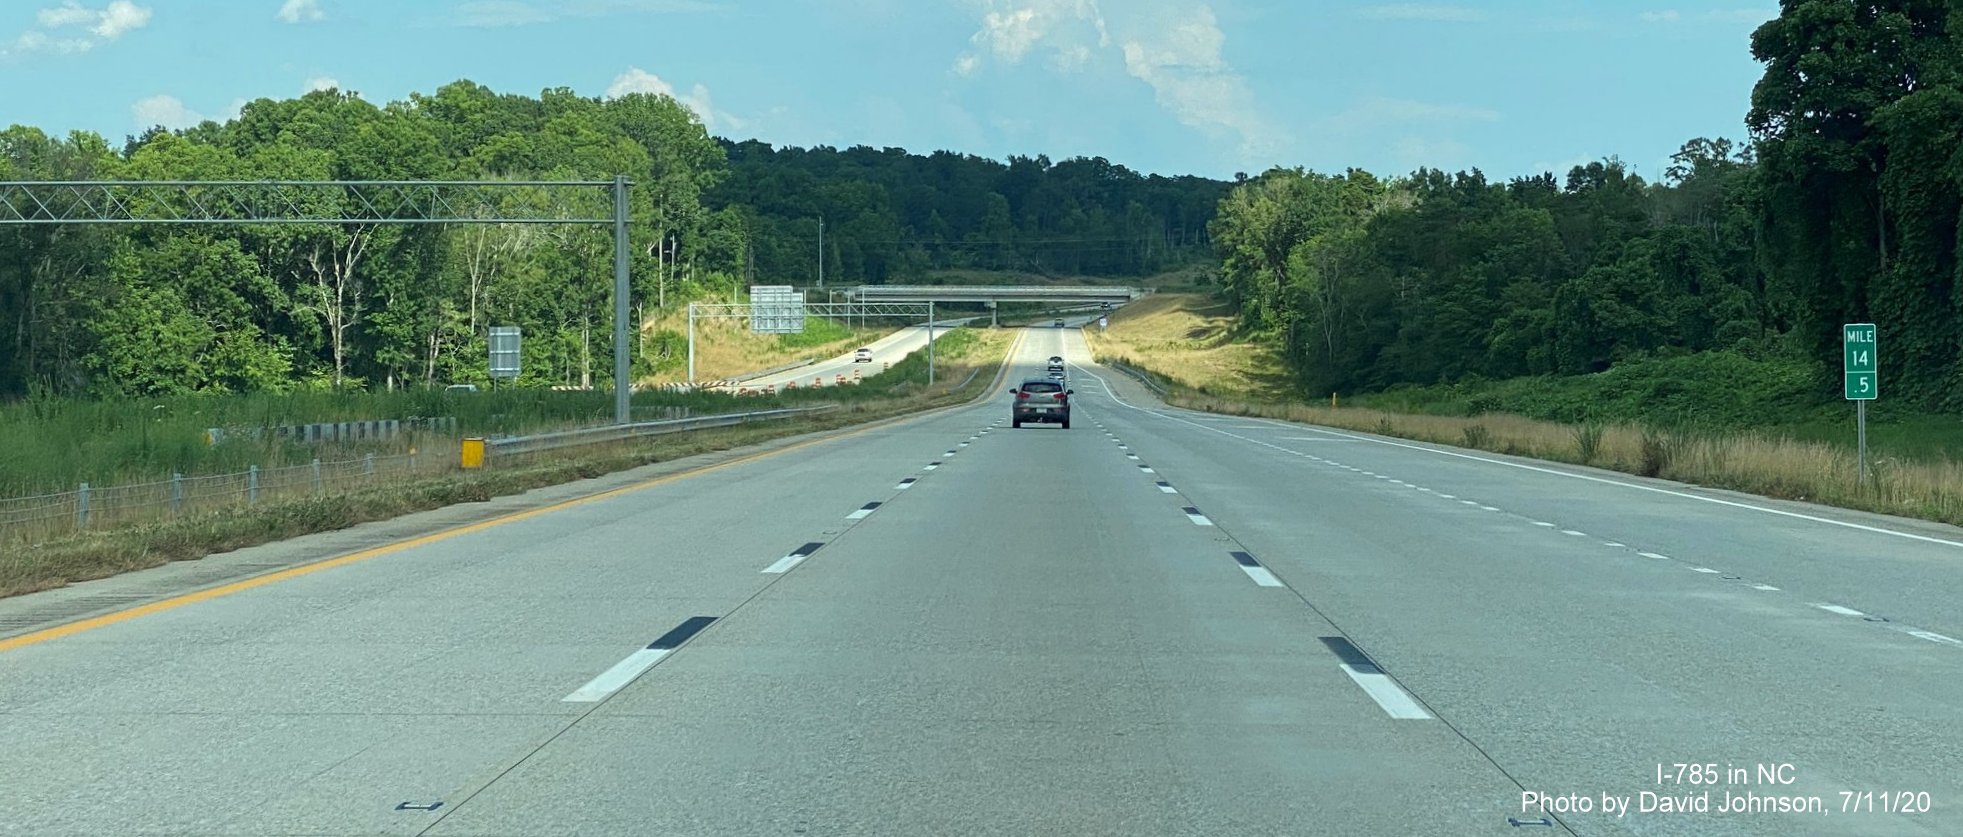 Image of I-785 South lanes just after US 29 interchange, by David Johnson July 2020